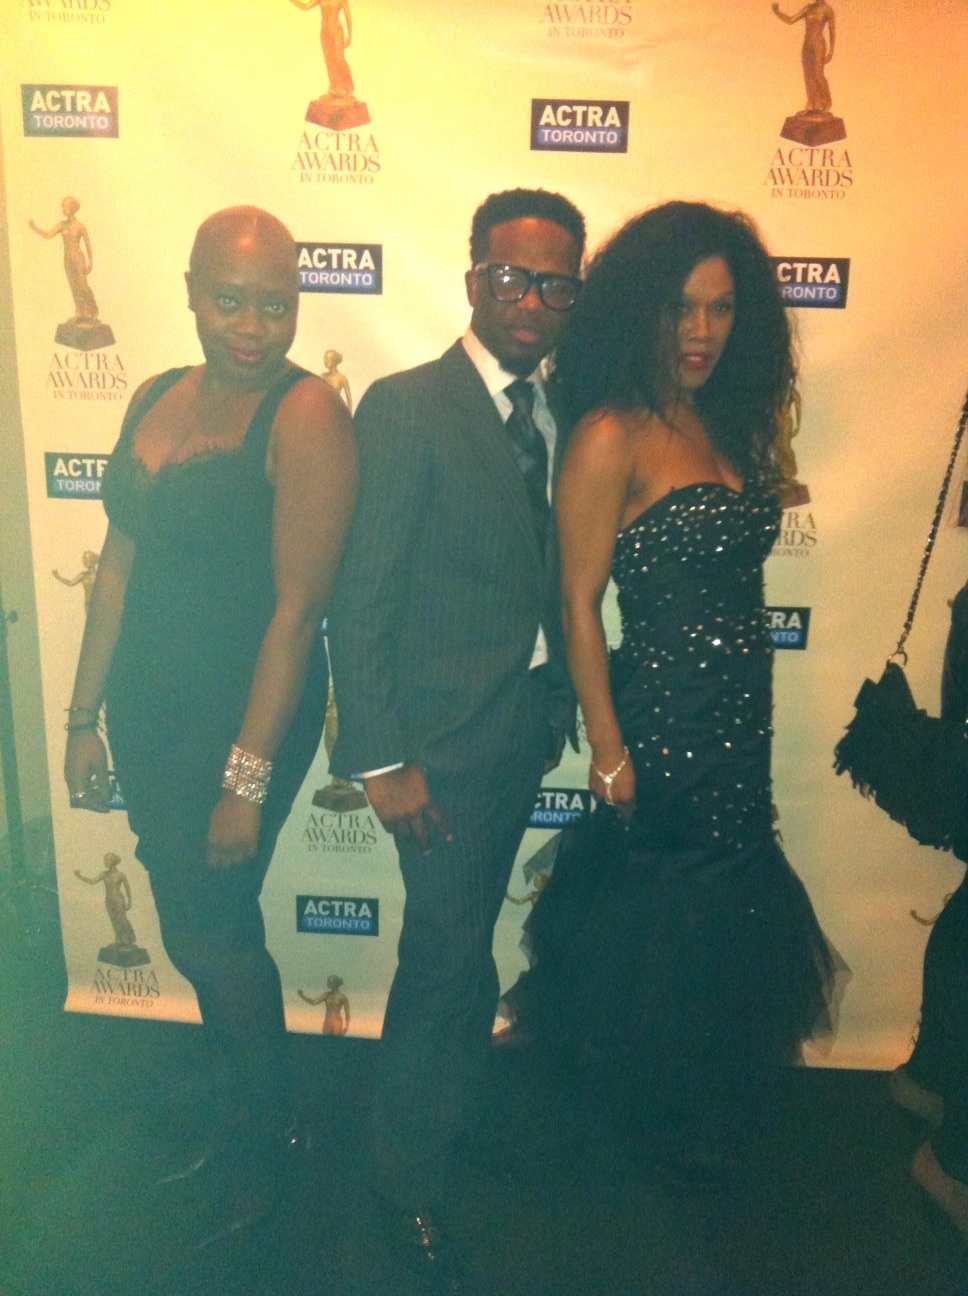 Dionne b Warren with Fashion Blogger, Carcia Campbell and Singer O'Neil Watson at the Actra Awards Toronto Canada